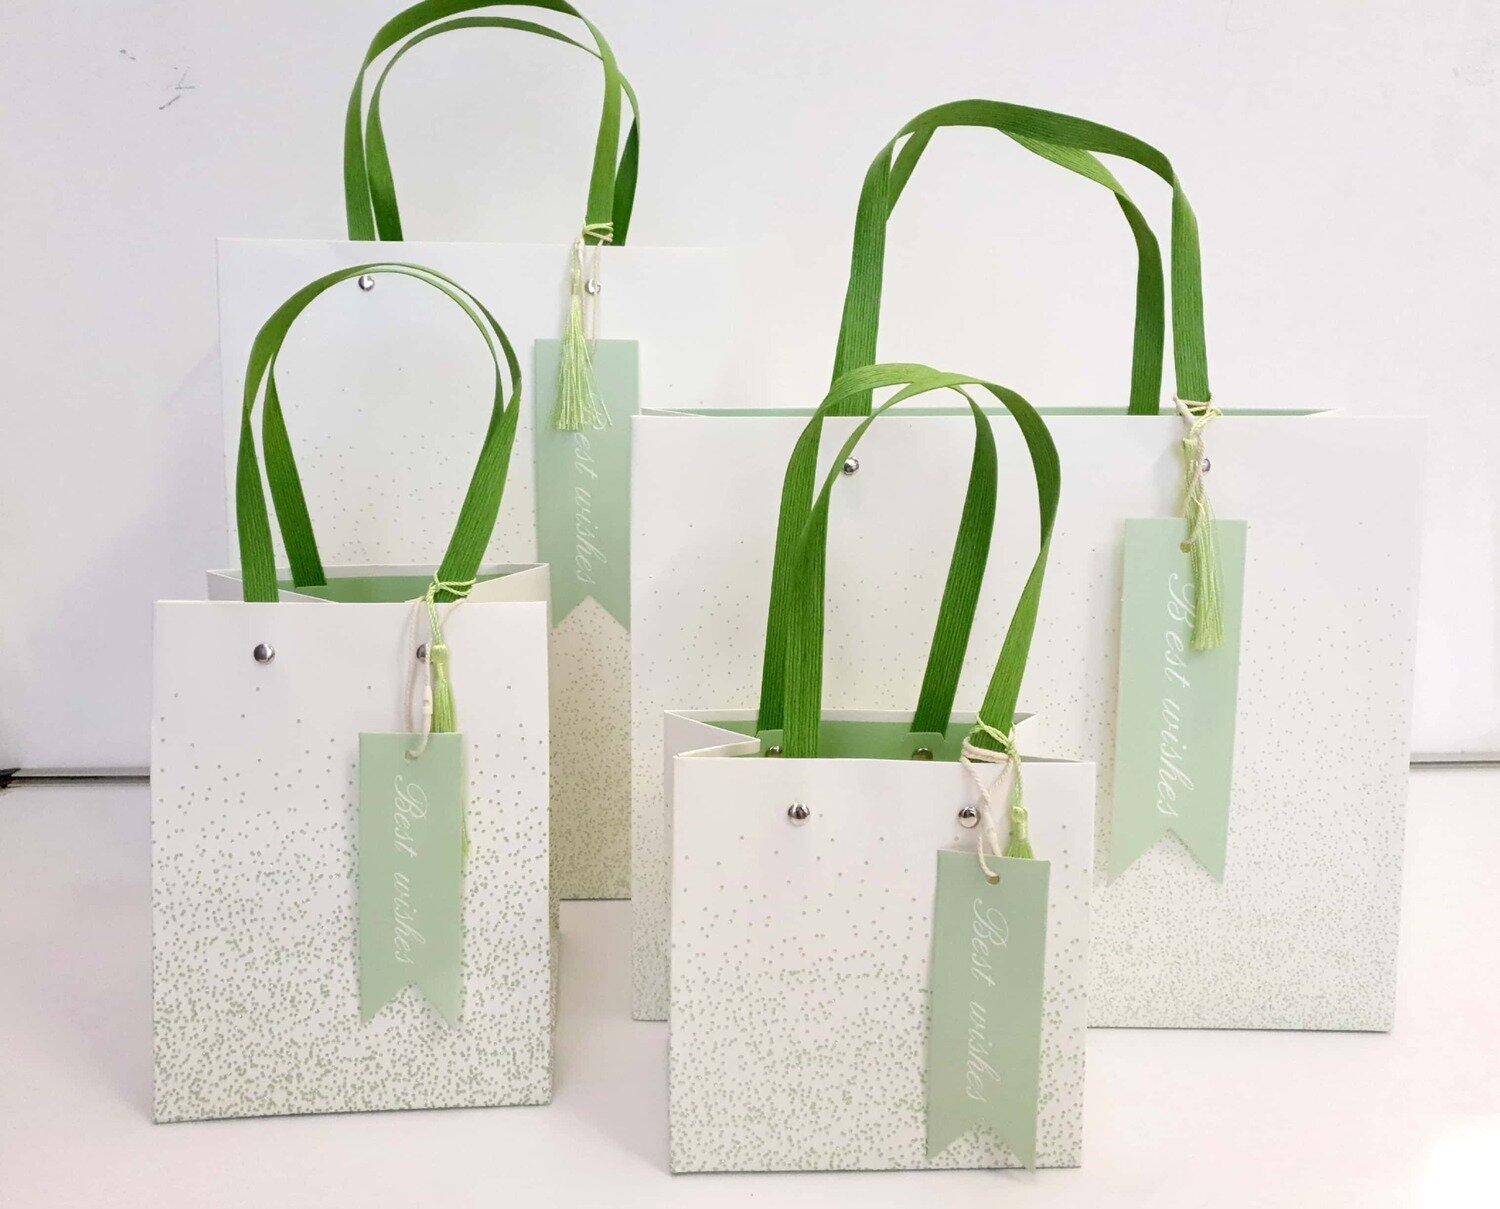 Best Wish White with Green Glitter Extra Small Gift Bag PK3 (R13.50 Each)